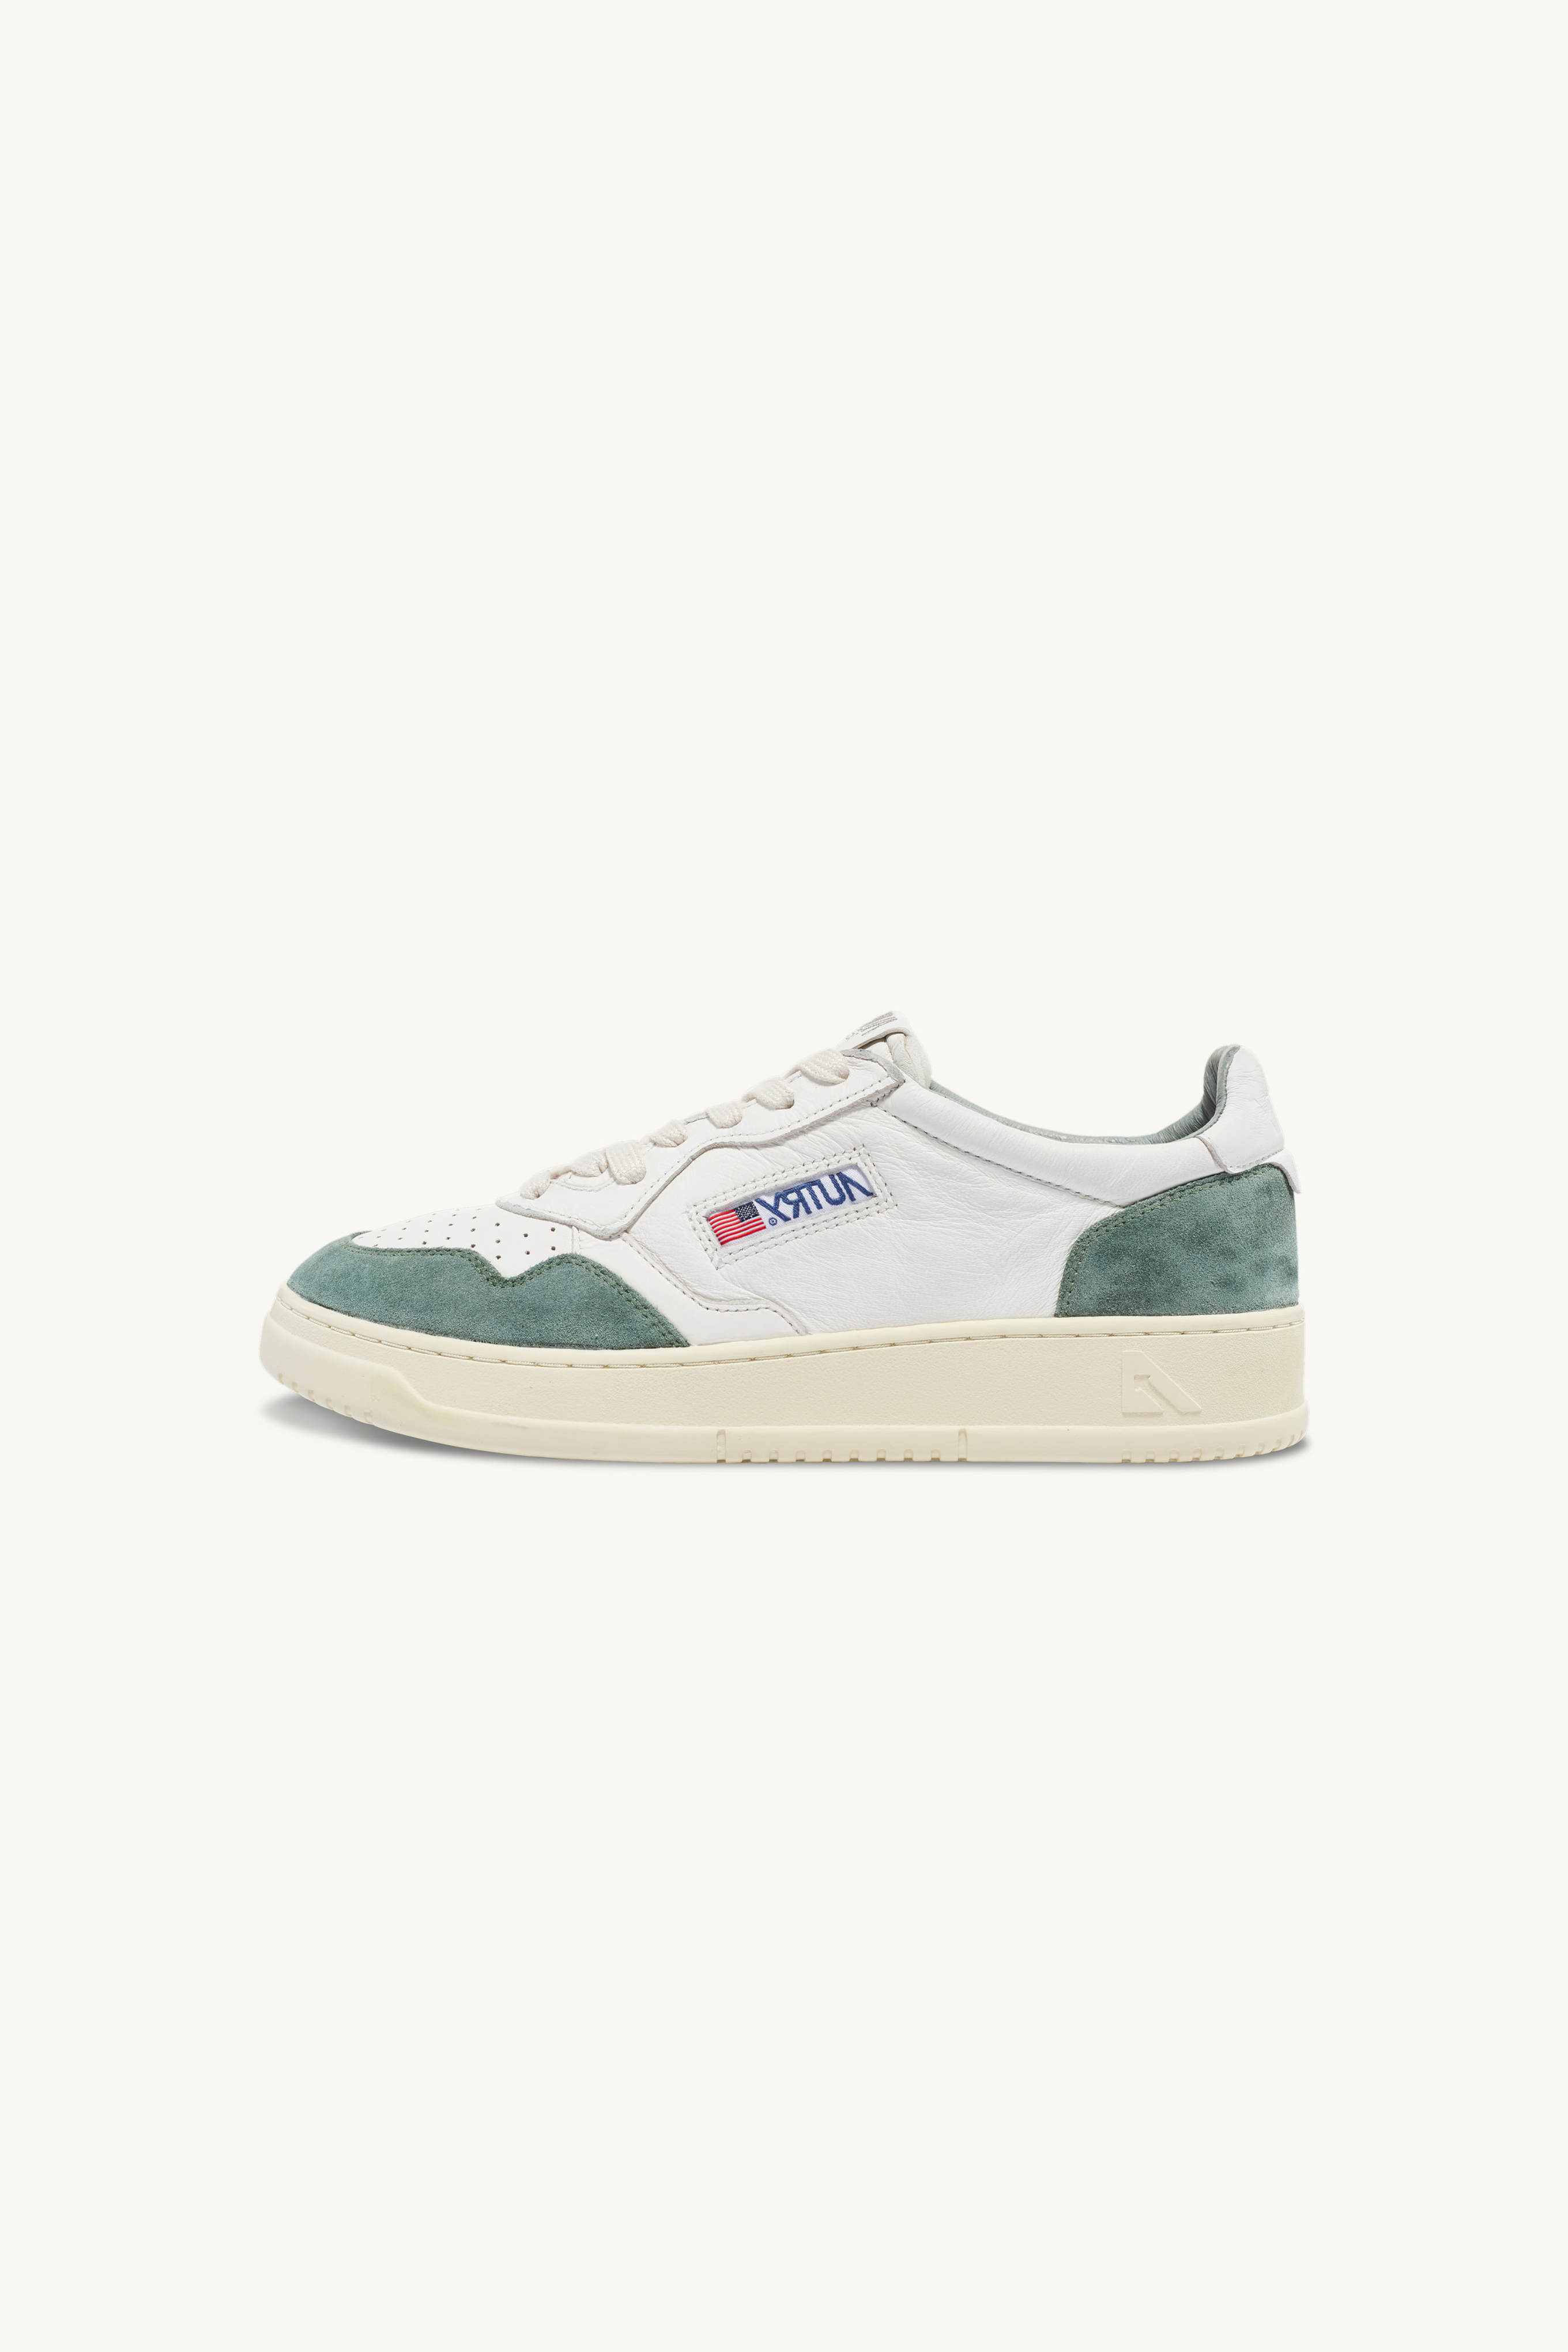 AULM-GS29 - MEDALIST LOW SNEAKERS IN WHITE GOATSKIN AND HUNTER GREEN SUEDE